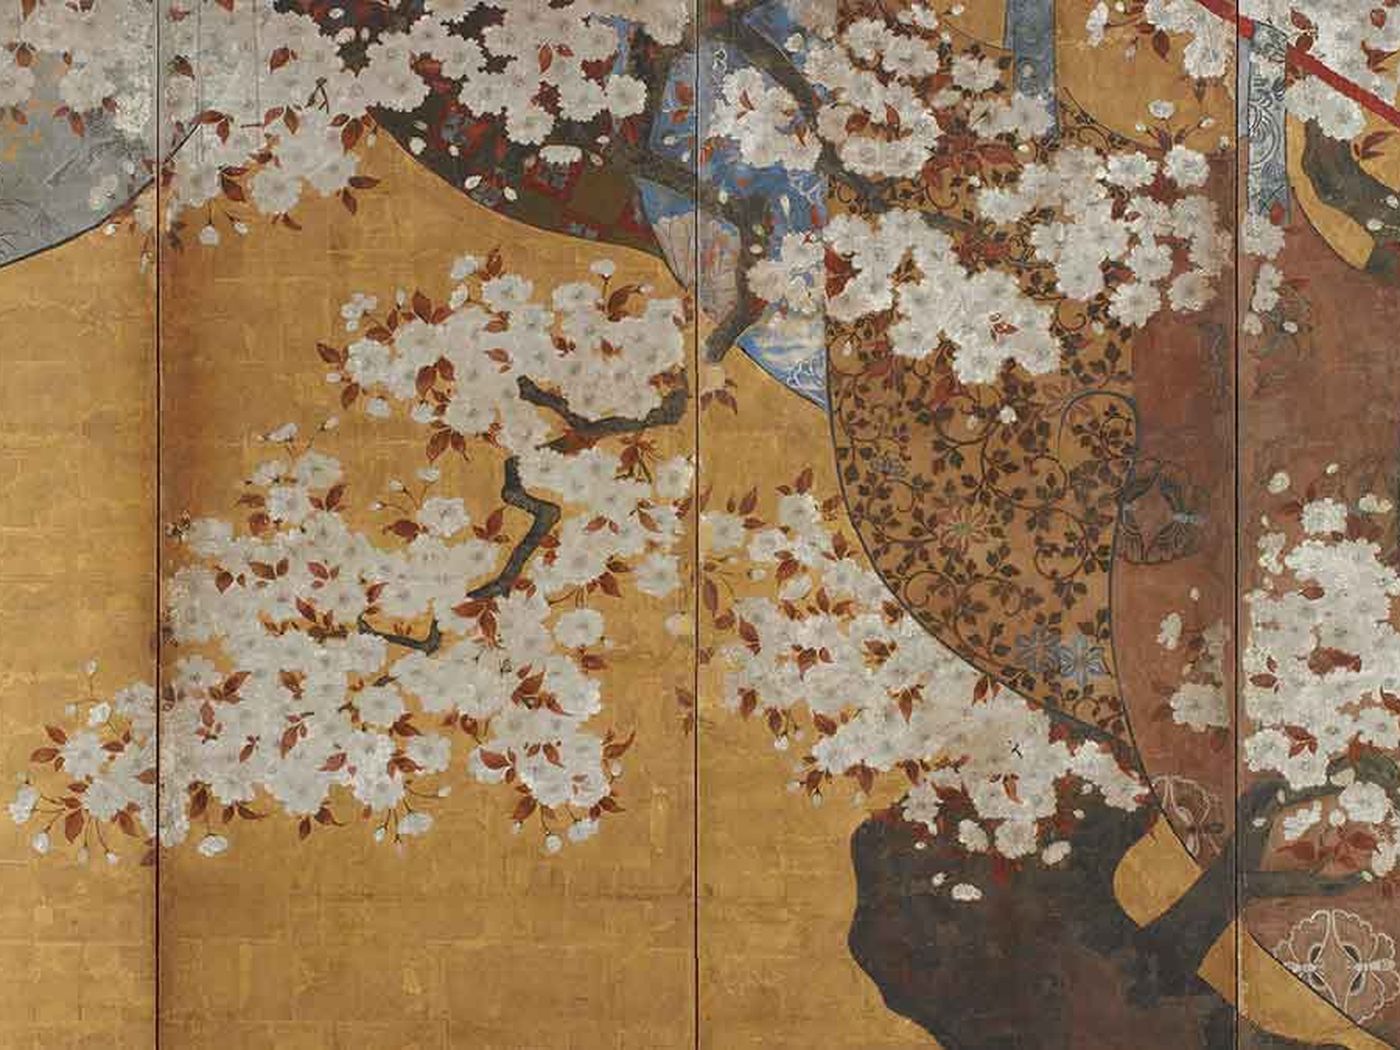 Honor the Tradition of Viewing Cherry Blossoms in These Signature Japanese  Works of Art, At the Smithsonian